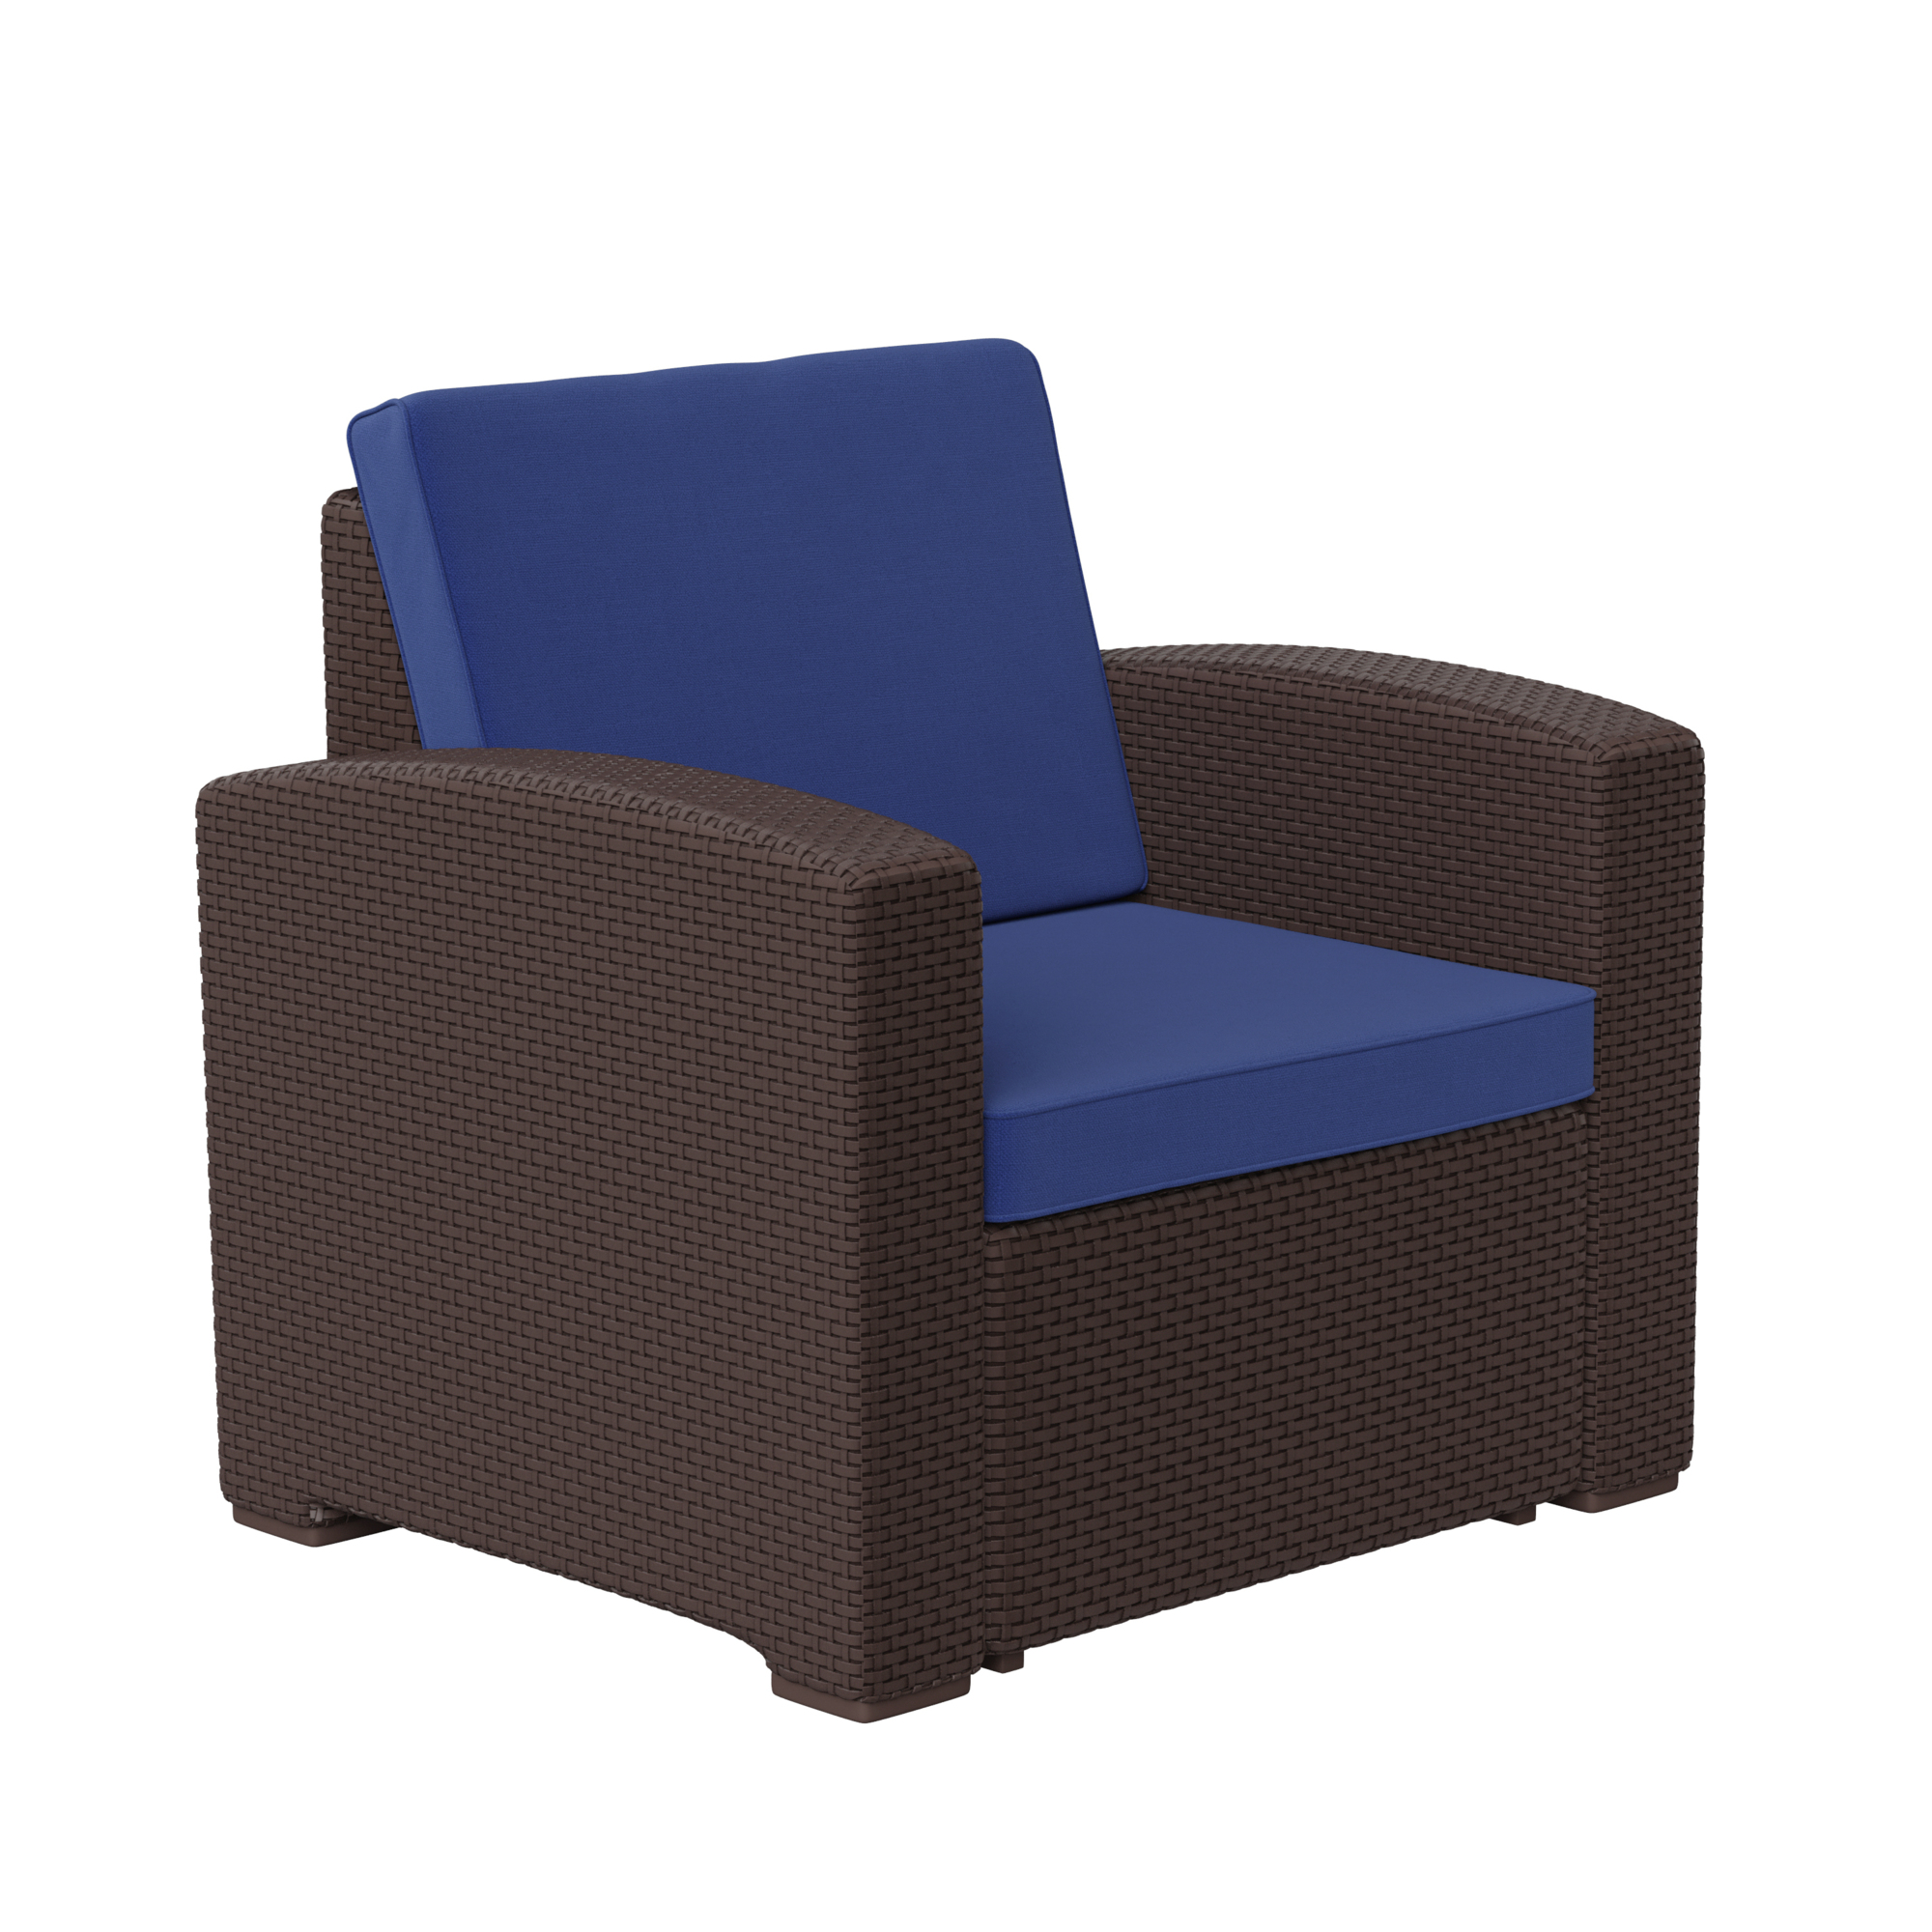 Flash Furniture, Chocolate Rattan Chair w/All-Weather Navy Cushion, Primary Color Brown, Material Resin, Width 32.75 in, Model DADSF11BNNV